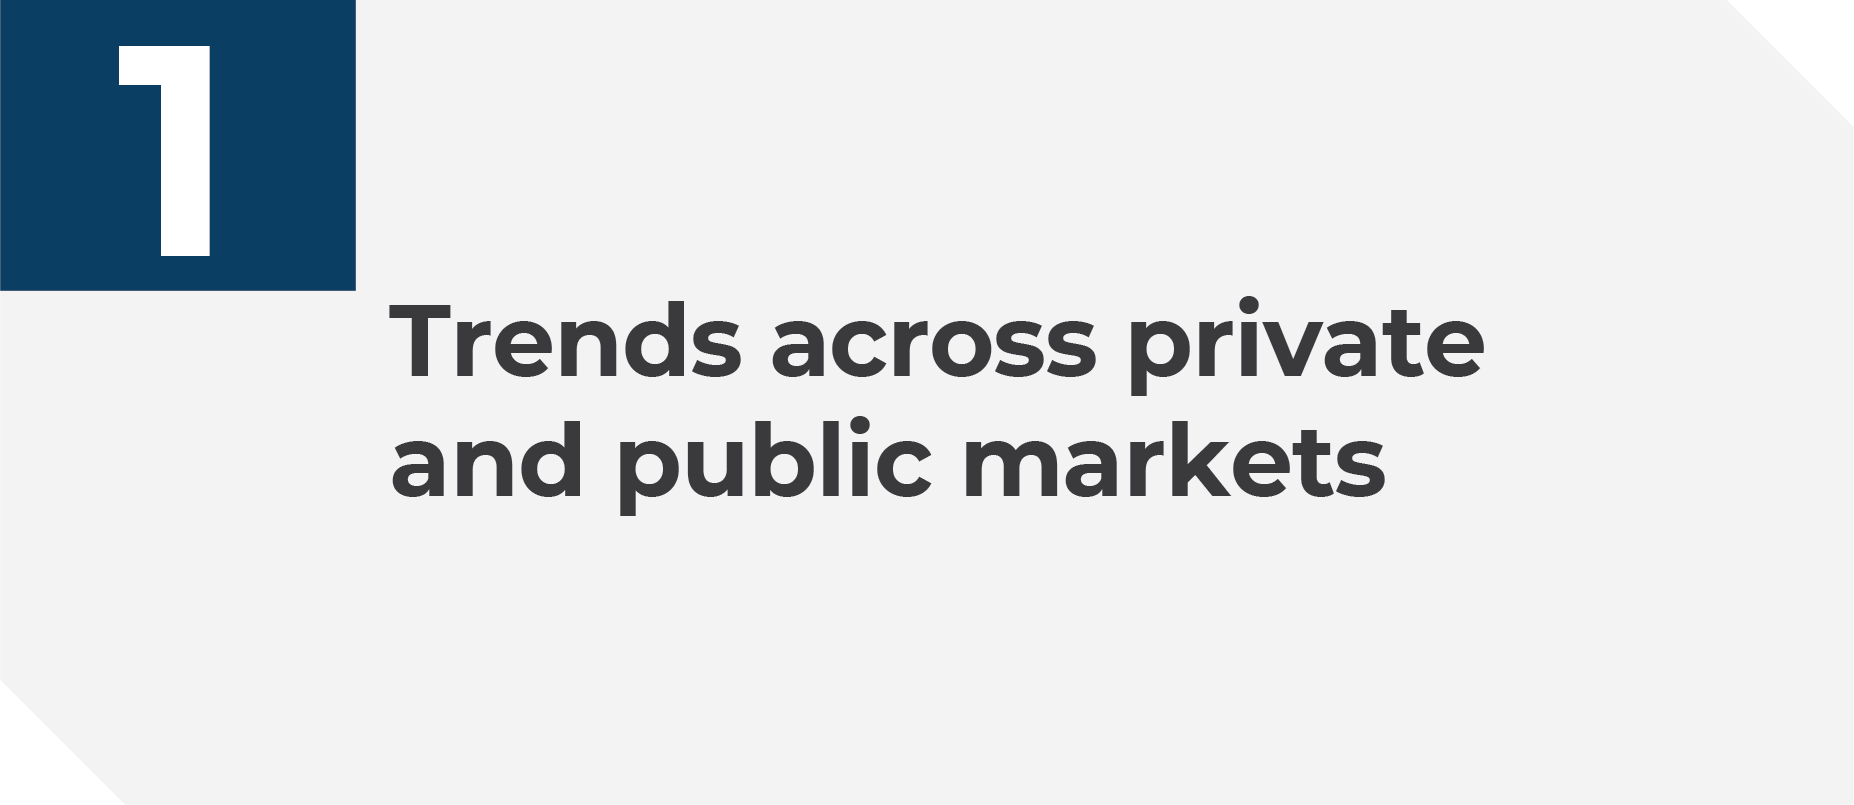 -Top trends across private and public markets, as well as Investor Relations